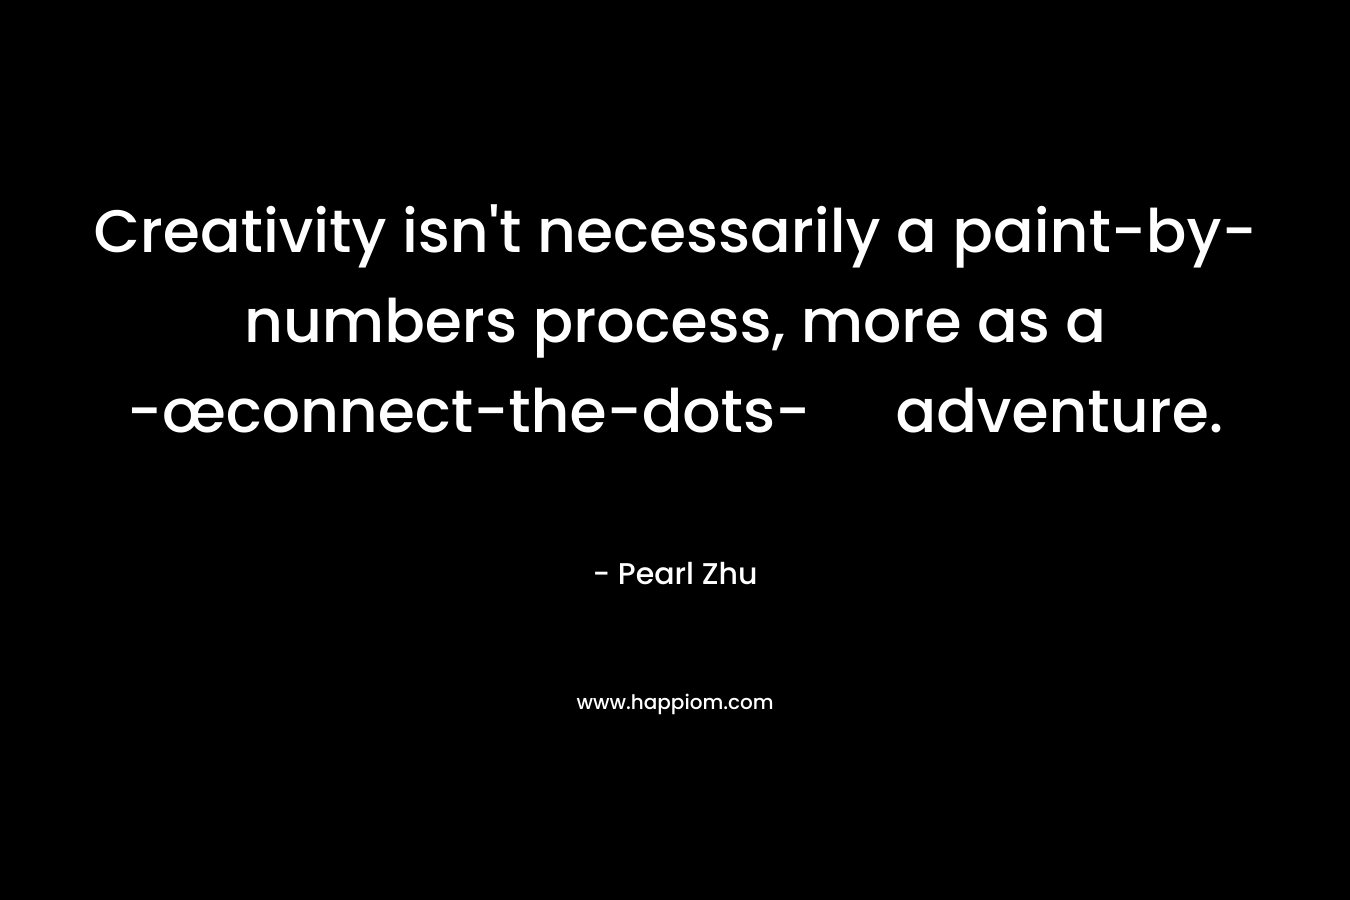 Creativity isn't necessarily a paint-by-numbers process, more as a -œconnect-the-dots- adventure.